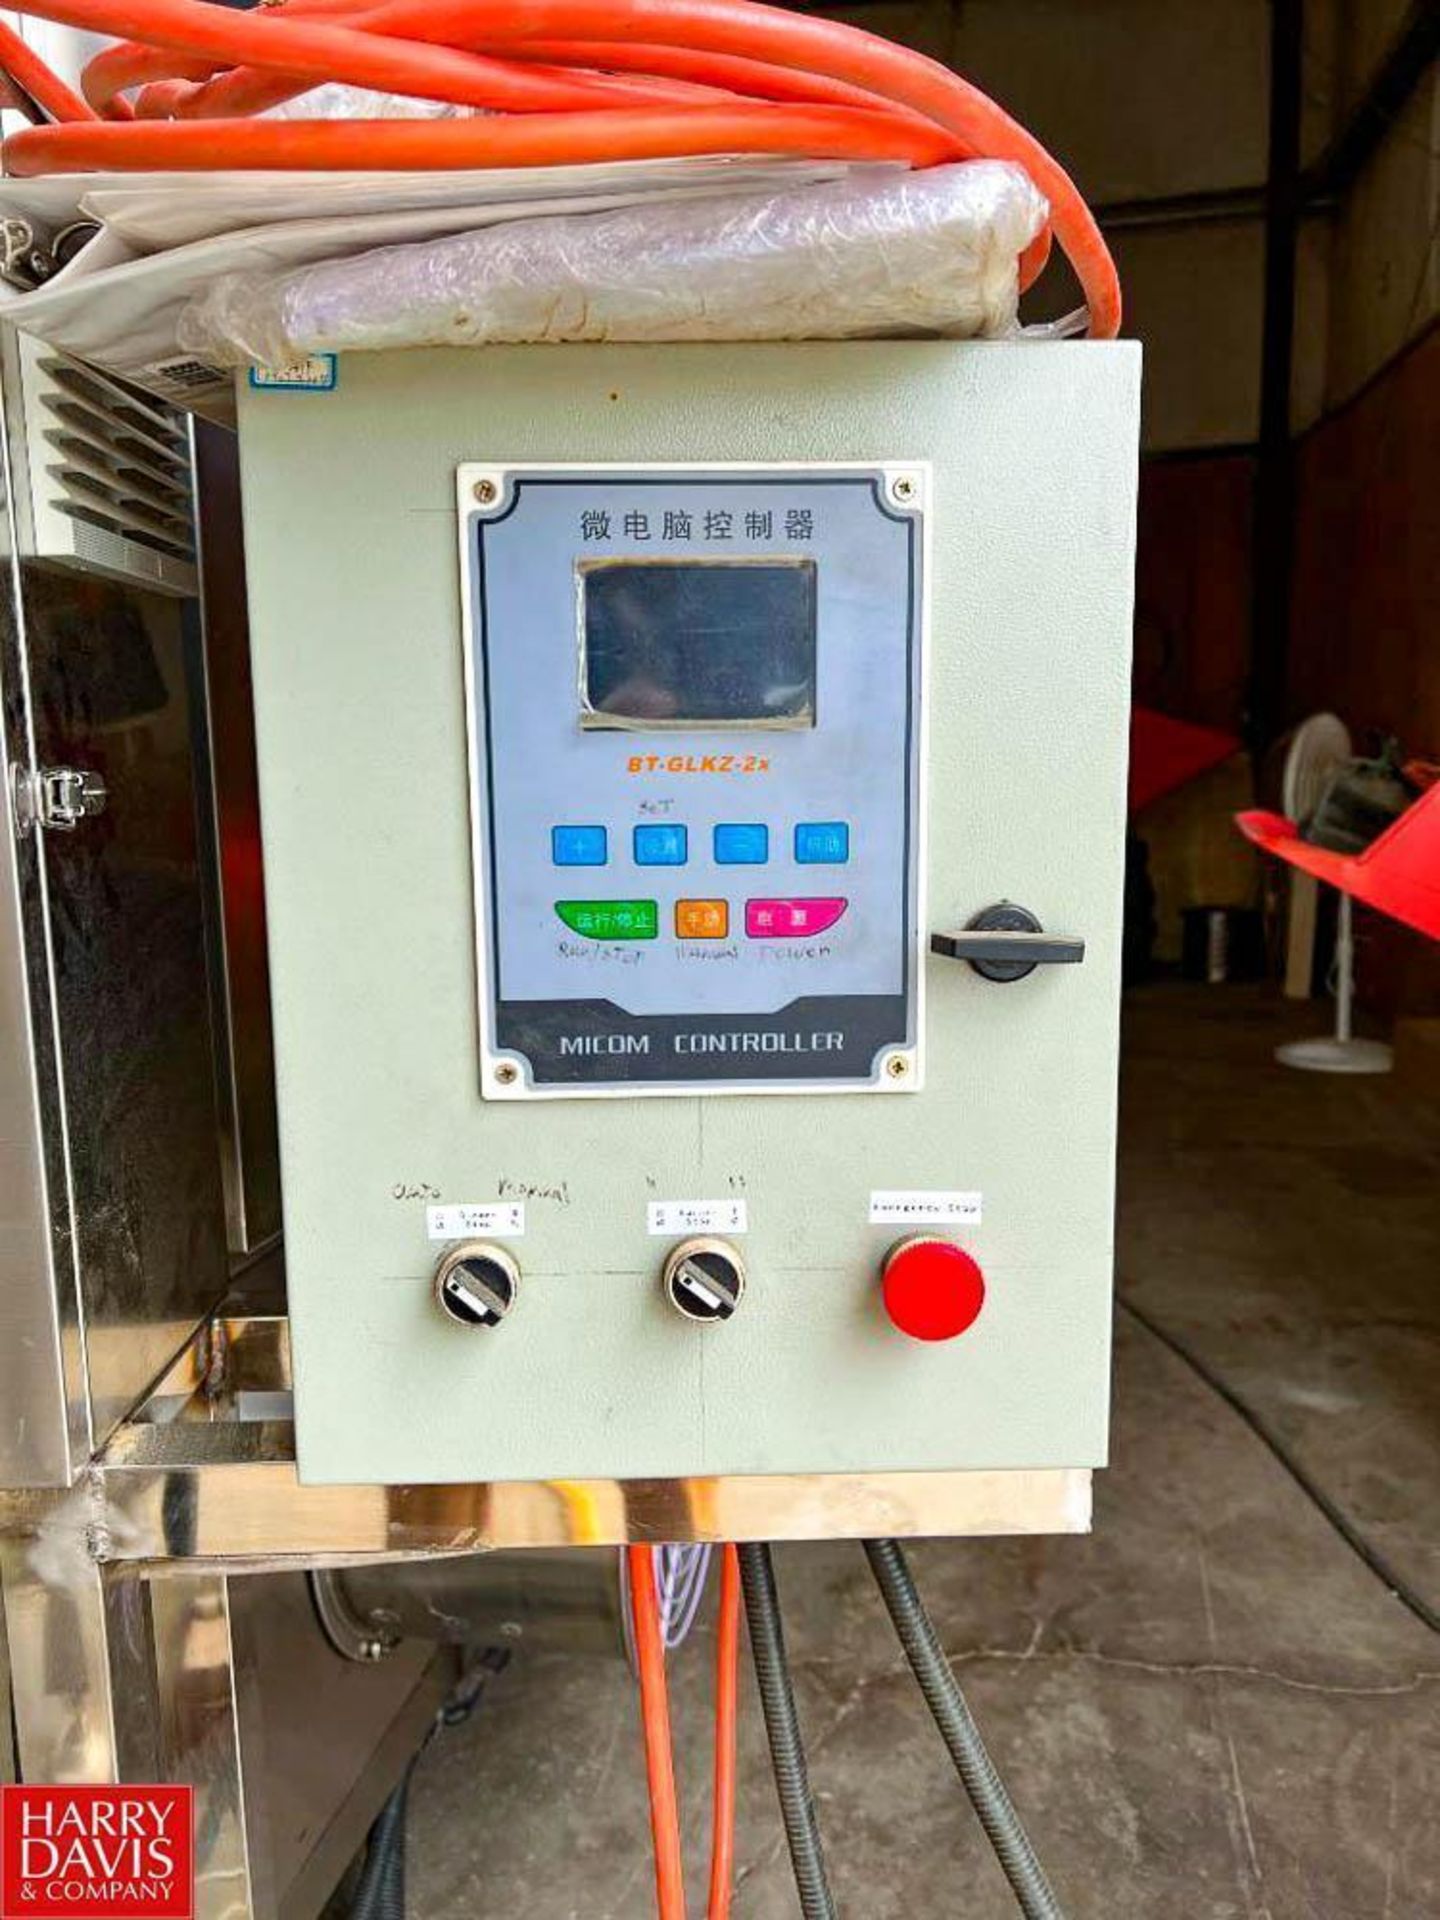 NEW 2019 Hemp Drying Machine Model DF-1: SN 201908001, with Elevator, Dimensions = 20' Length x 5' W - Image 8 of 13